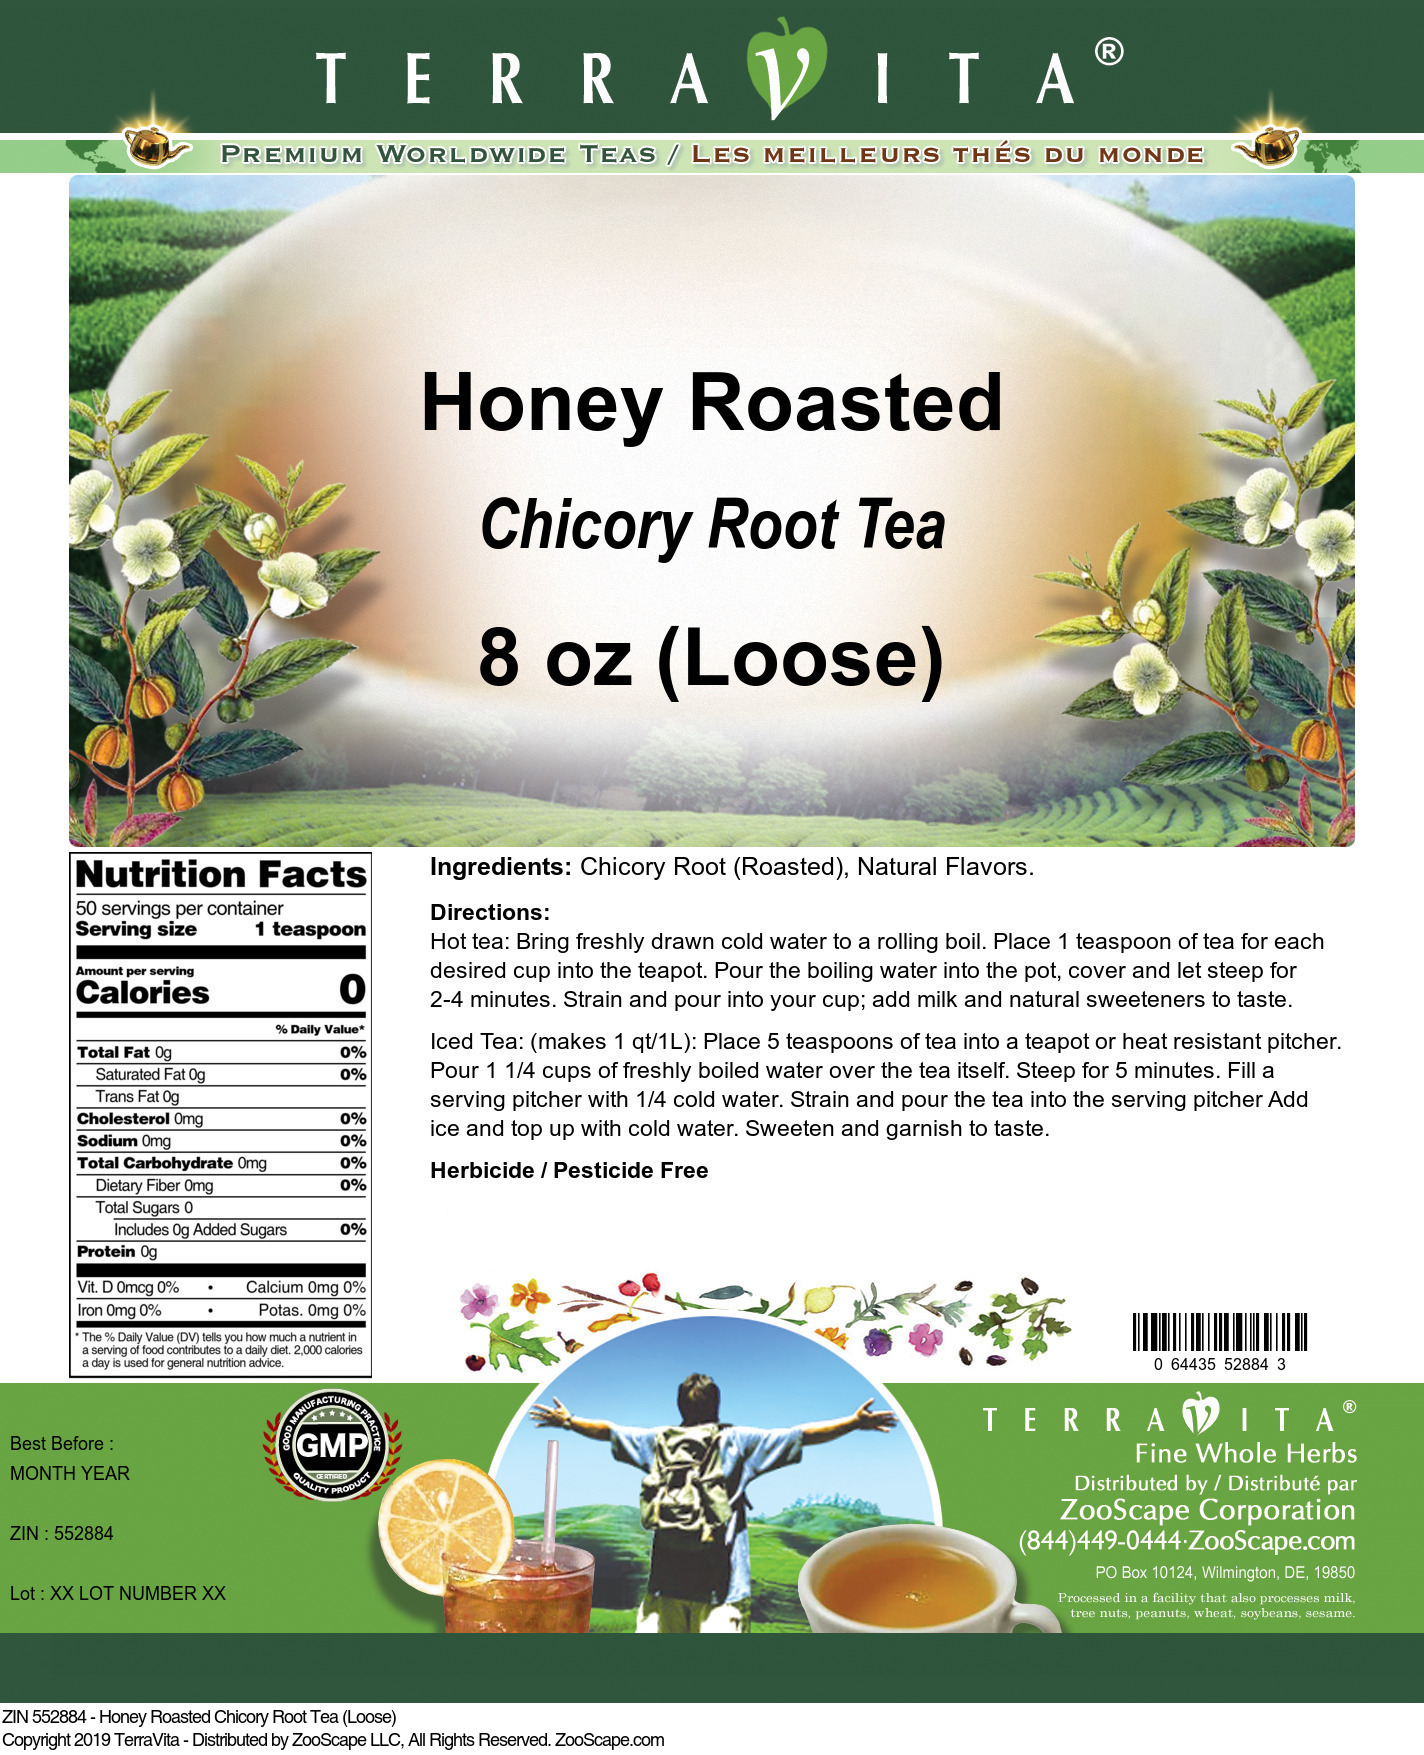 Honey Roasted Chicory Root Tea (Loose) - Label